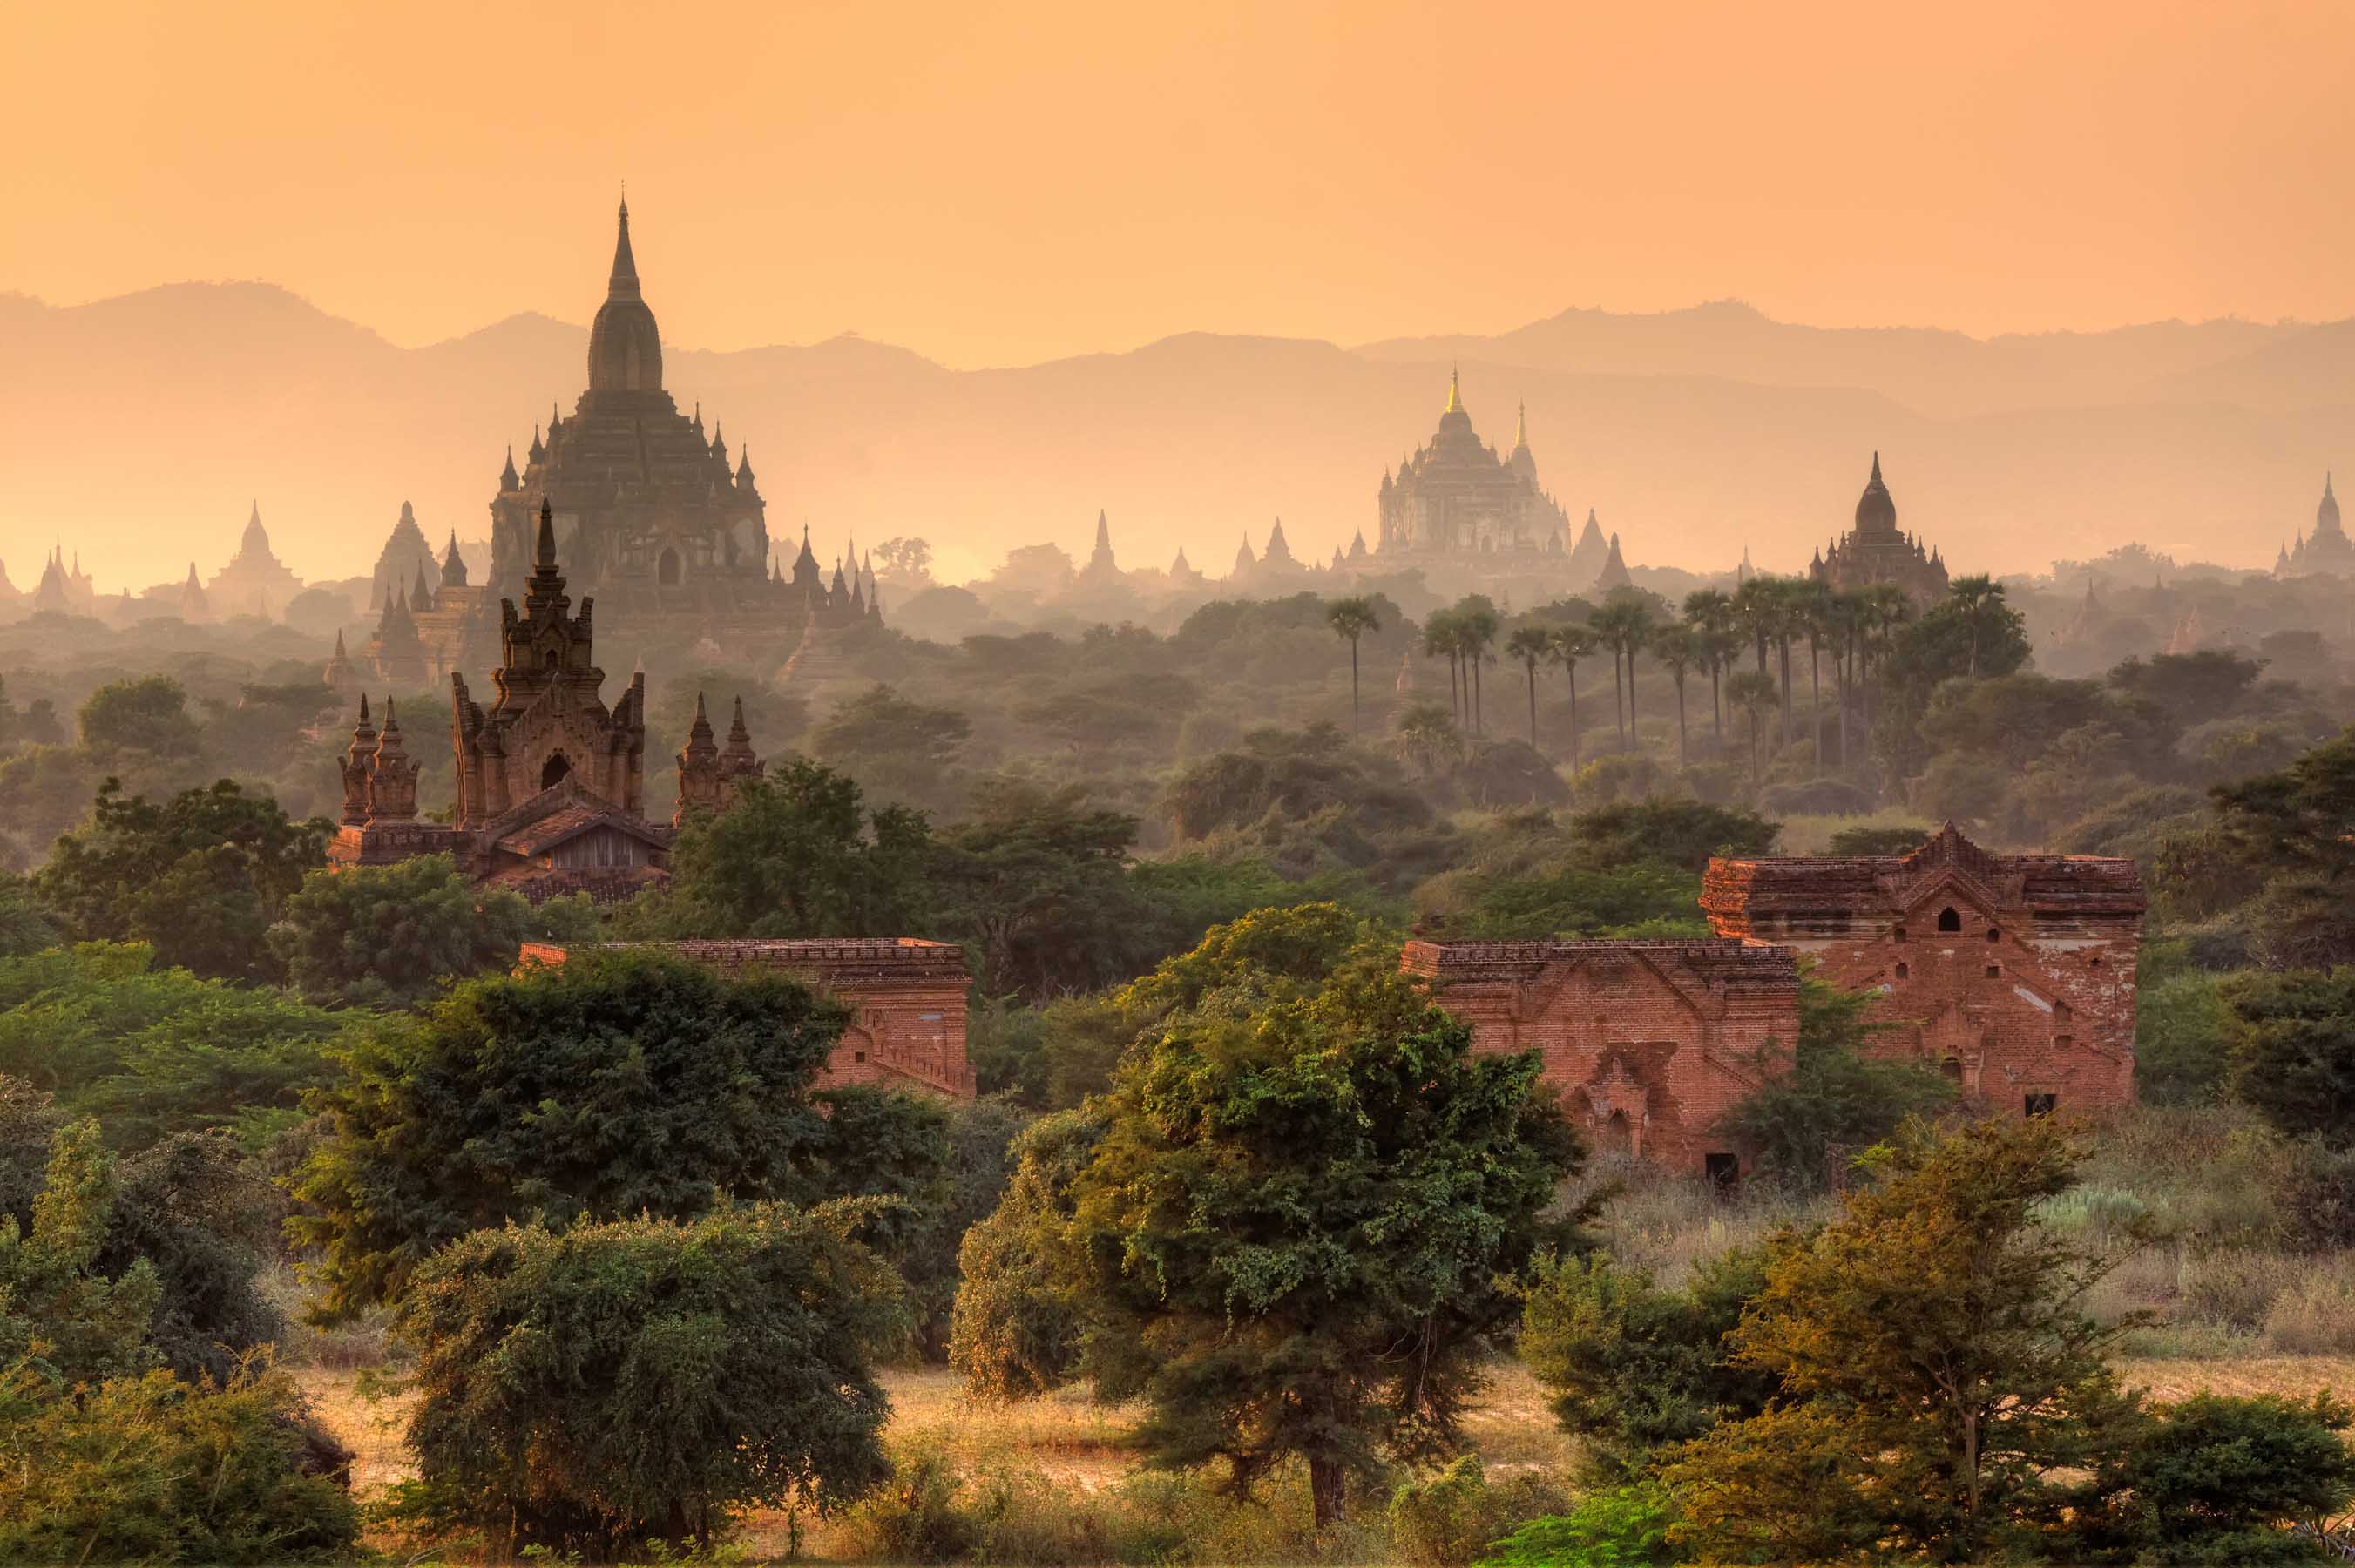 Bagan, an ancient city and a UNESCO site in Myanmar